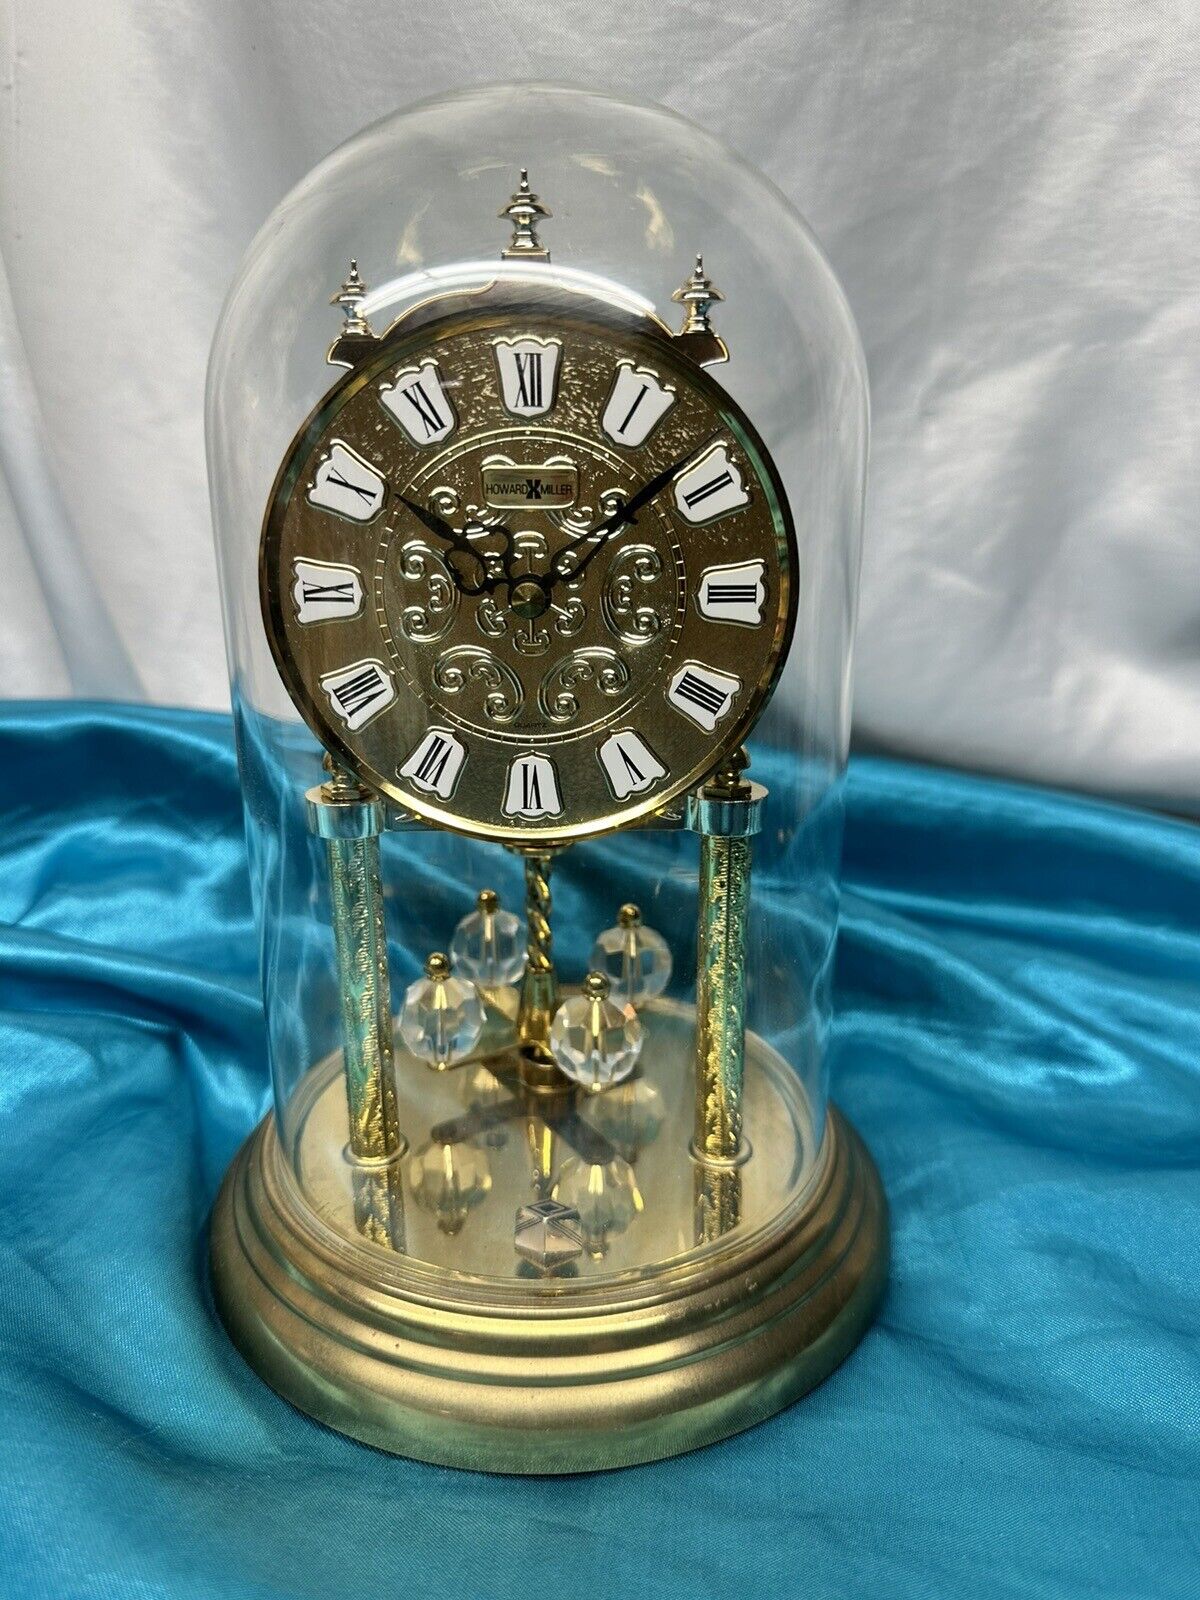 NIB Howard Miller Glass Dome Clock Model 613-170 - Made in West Germany